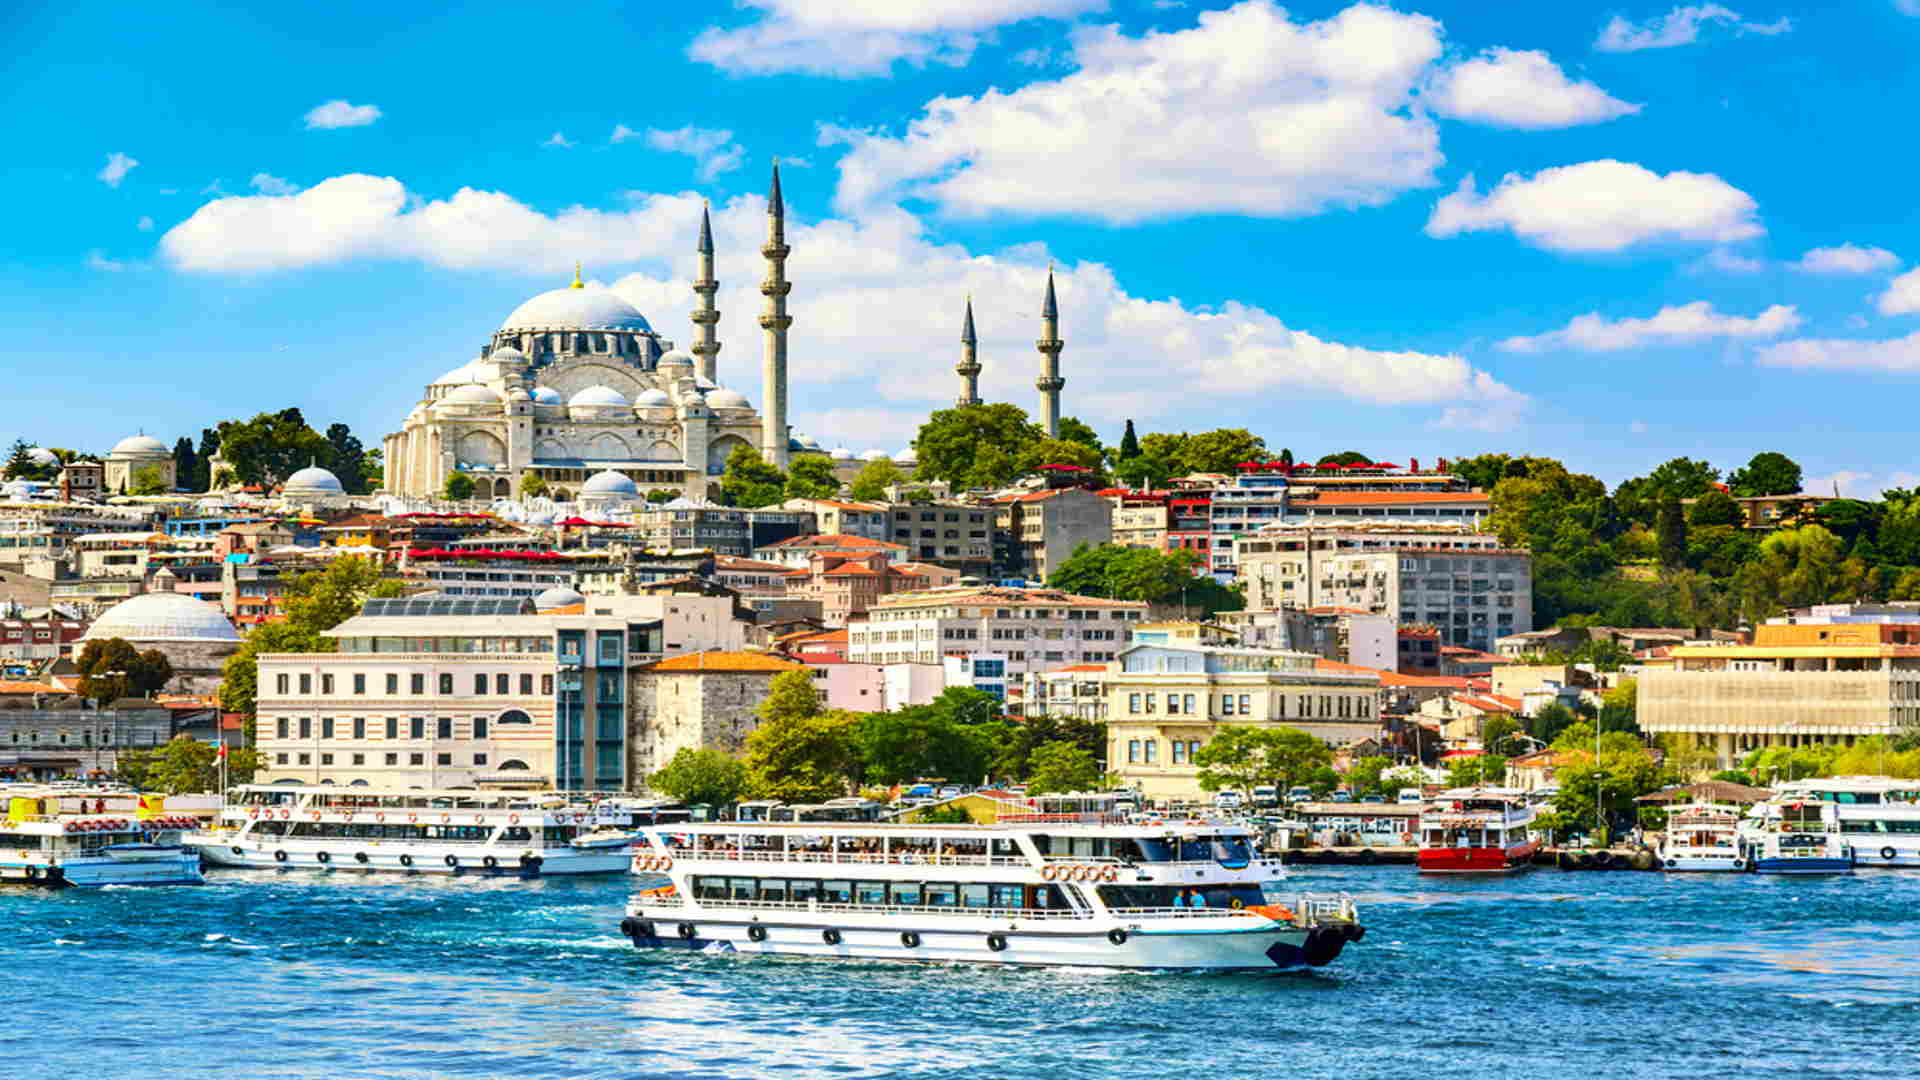 5 Days in Istanbul on a Budget: Tips and Tricks